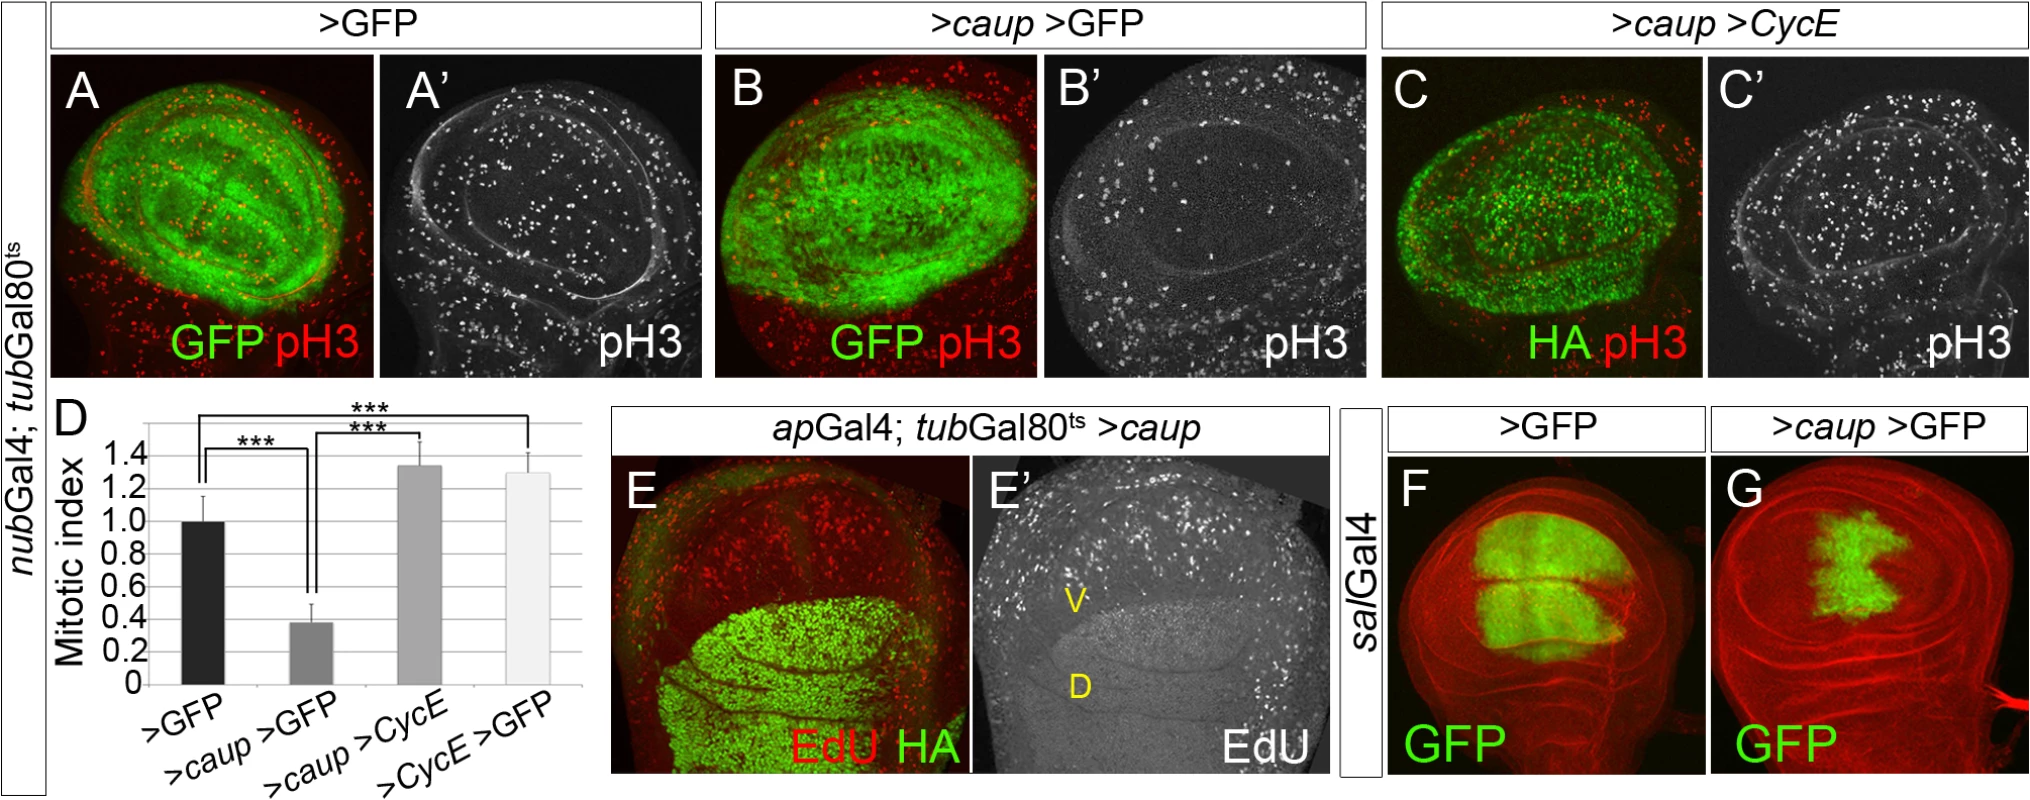 Over-expression of <i>caup</i> inhibits cell cycle progression.